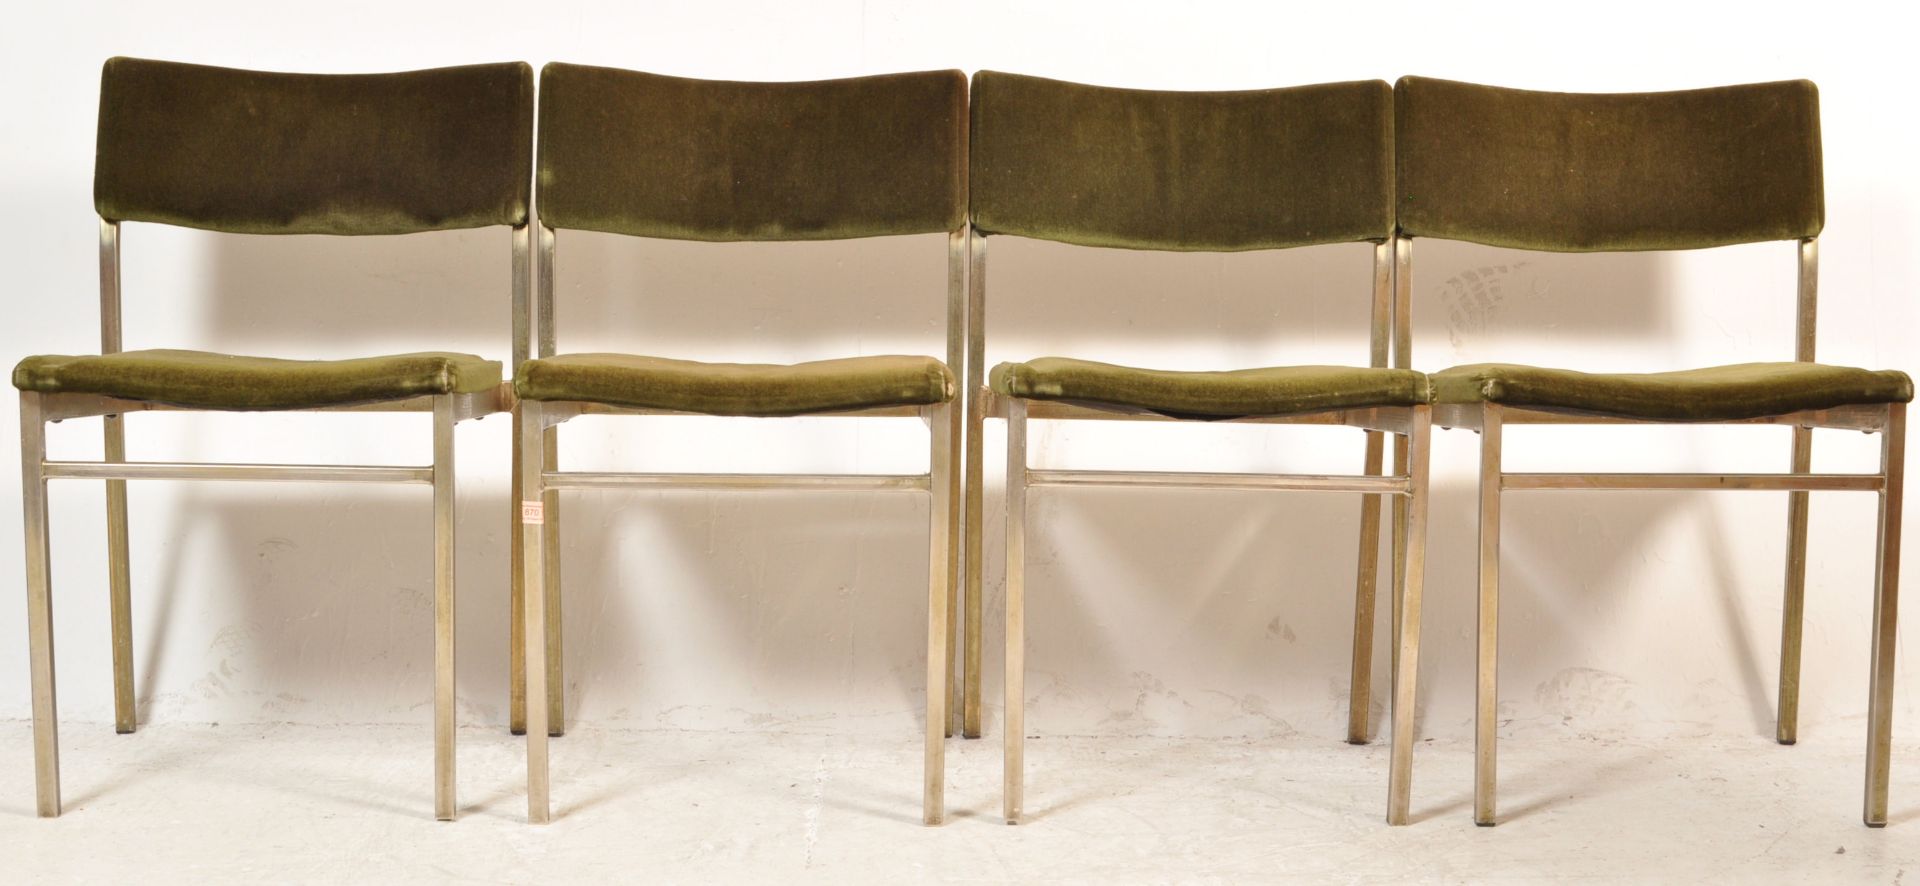 FOUR VINTAGE RETRO 20TH STACKING DINING CHAIRS.